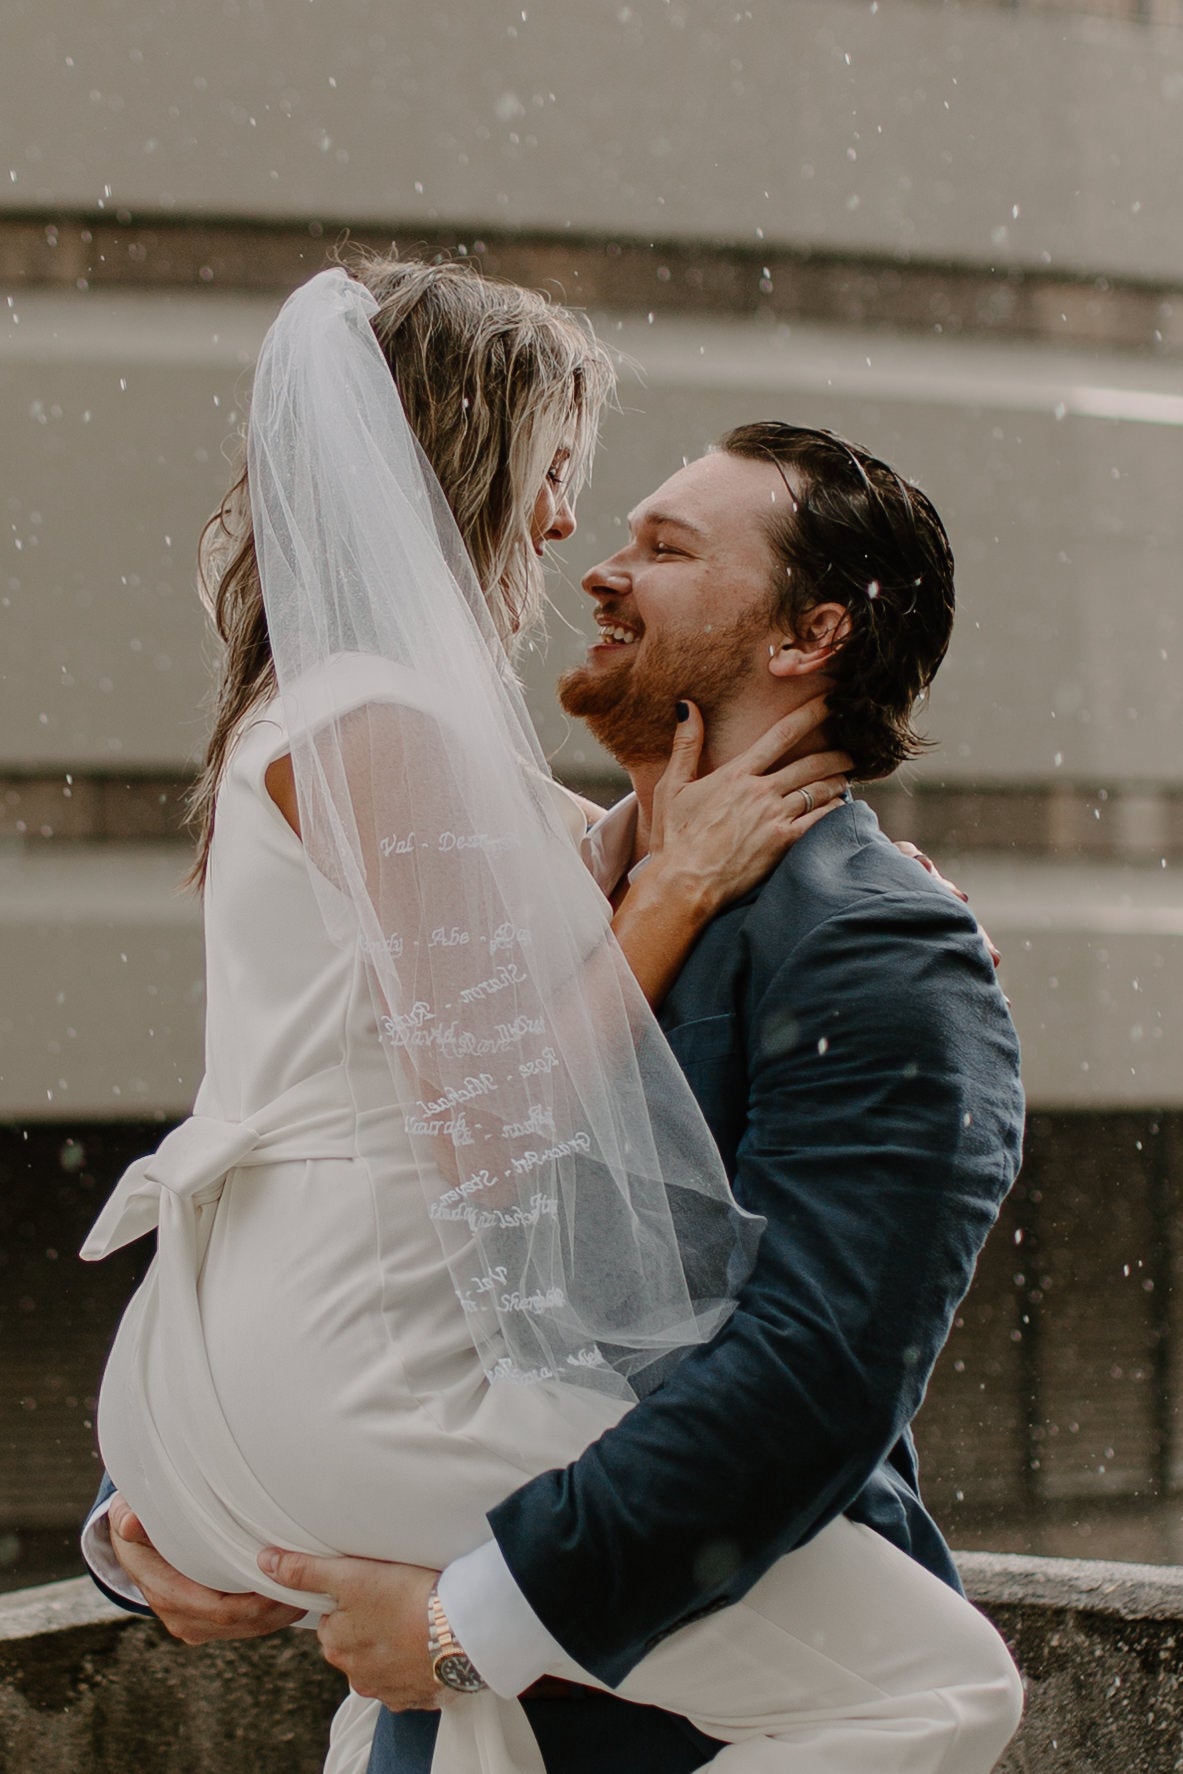 couple embracing in rain with bride in white sophisticated bridal veil wtih writing